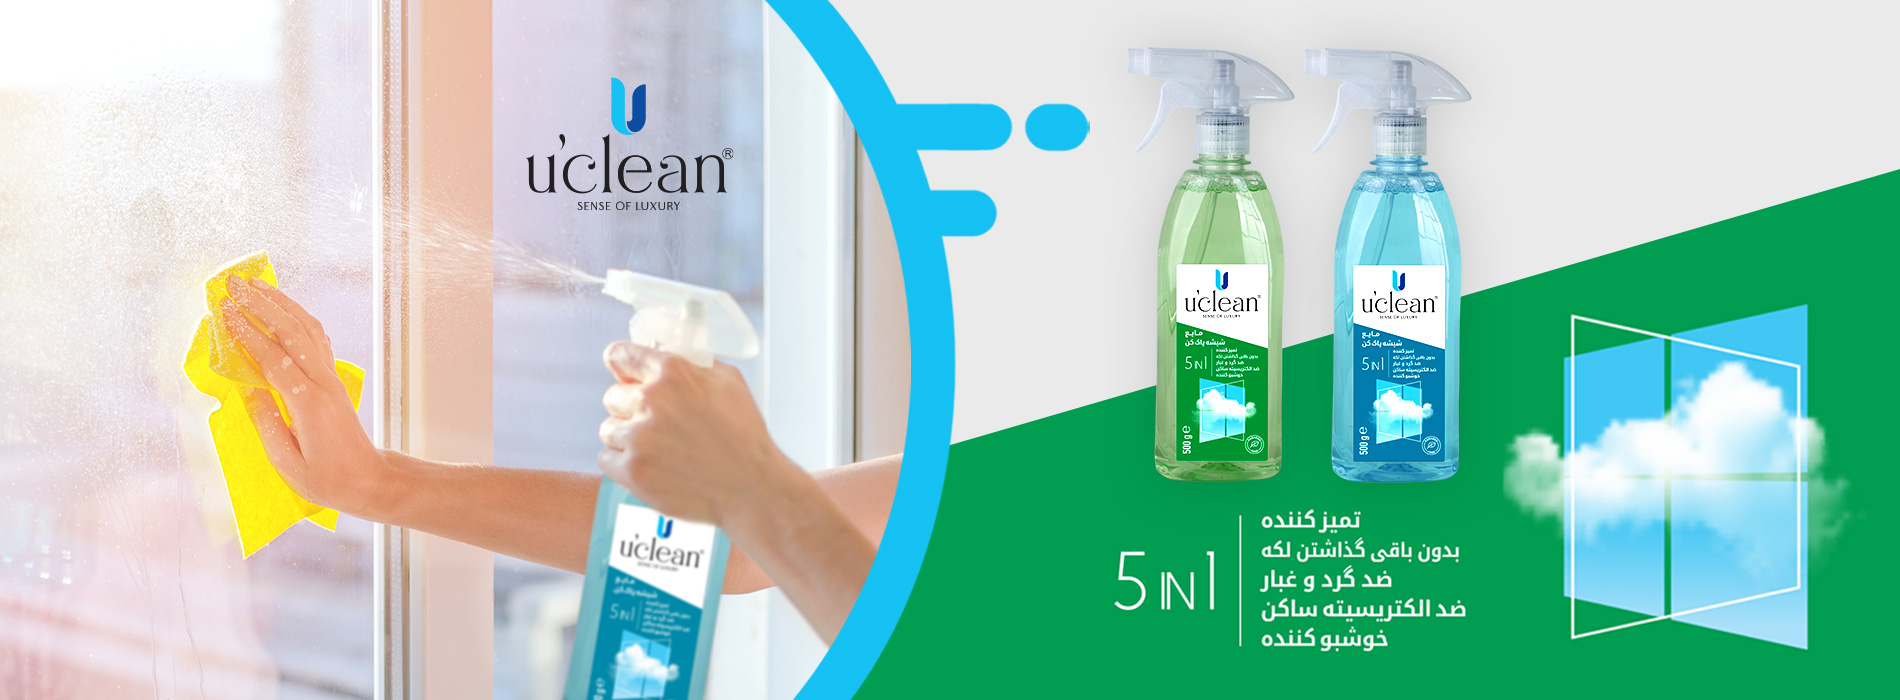 uclean-product02